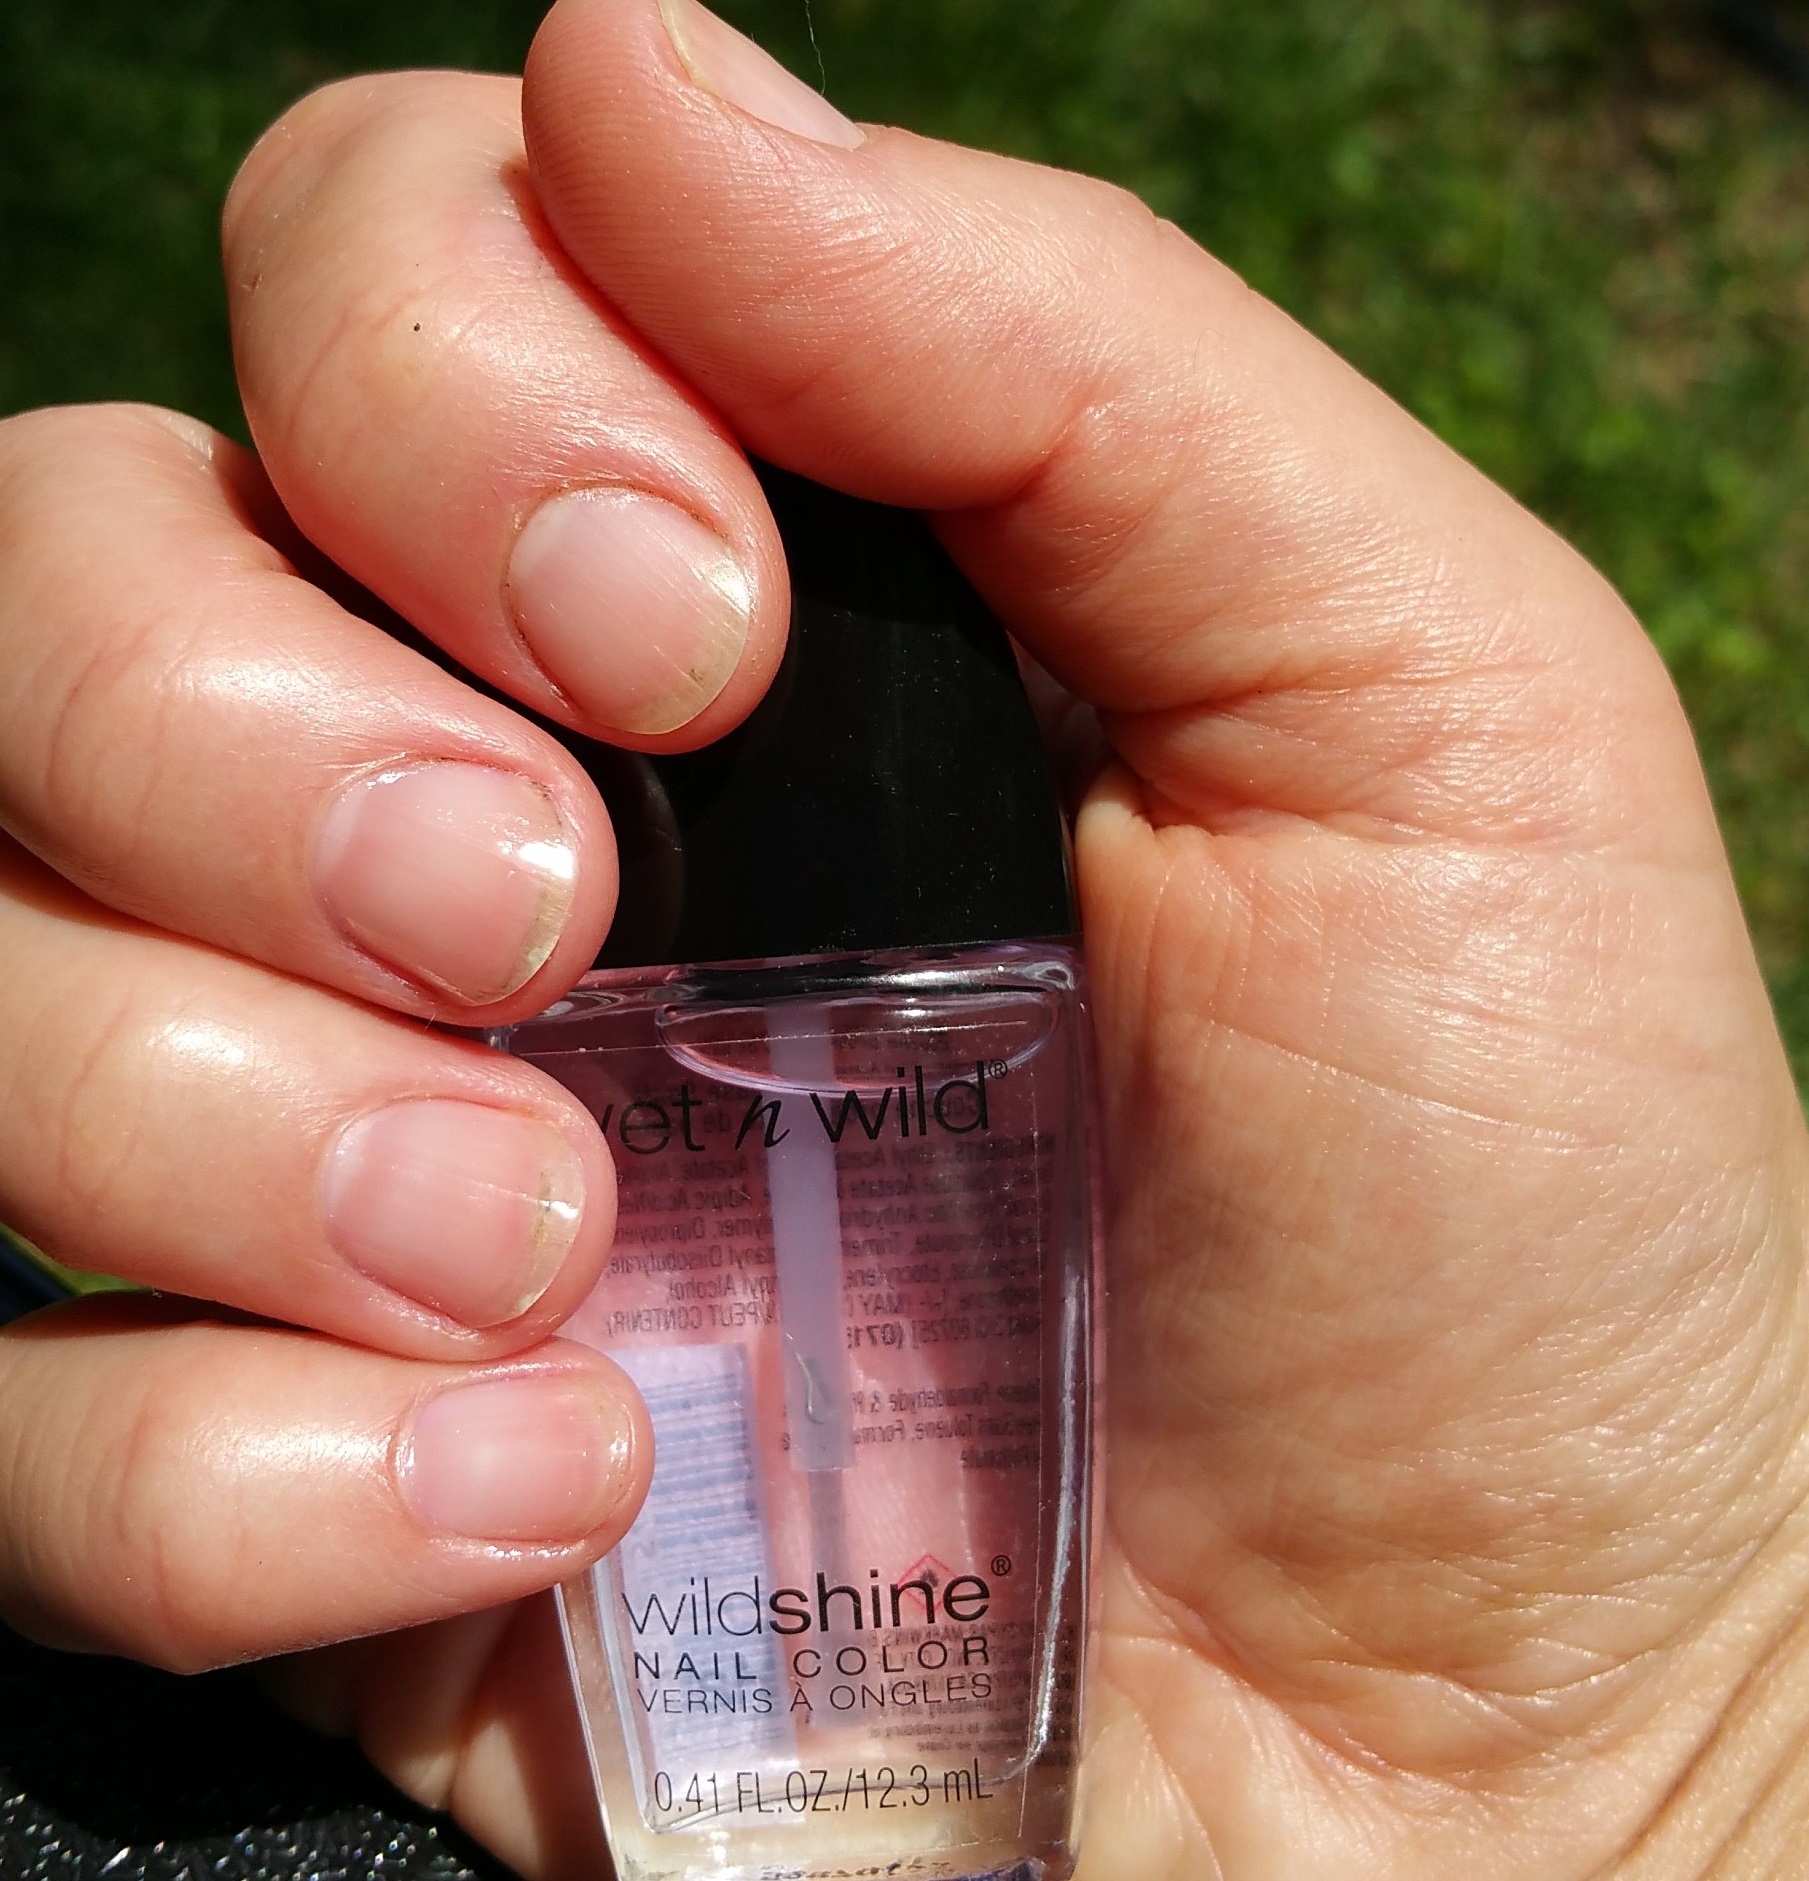 Swatch of Wet N Wild WildShine Nail Polish and Bare Nail Index Finger